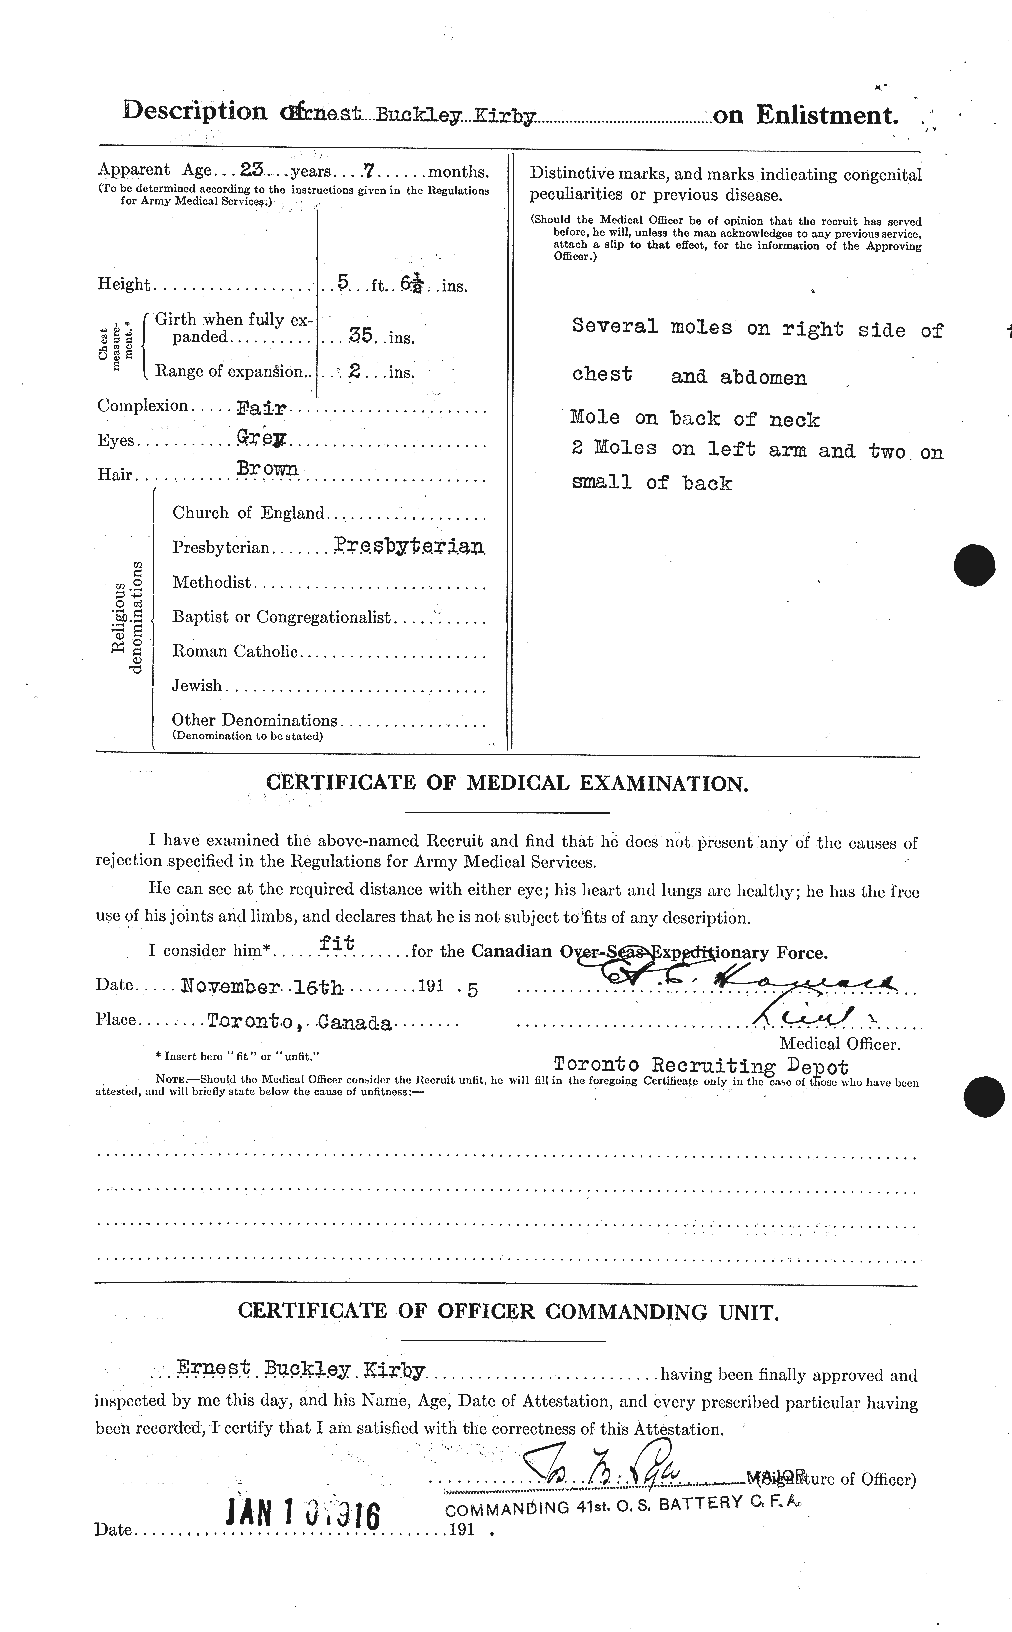 Personnel Records of the First World War - CEF 437179b